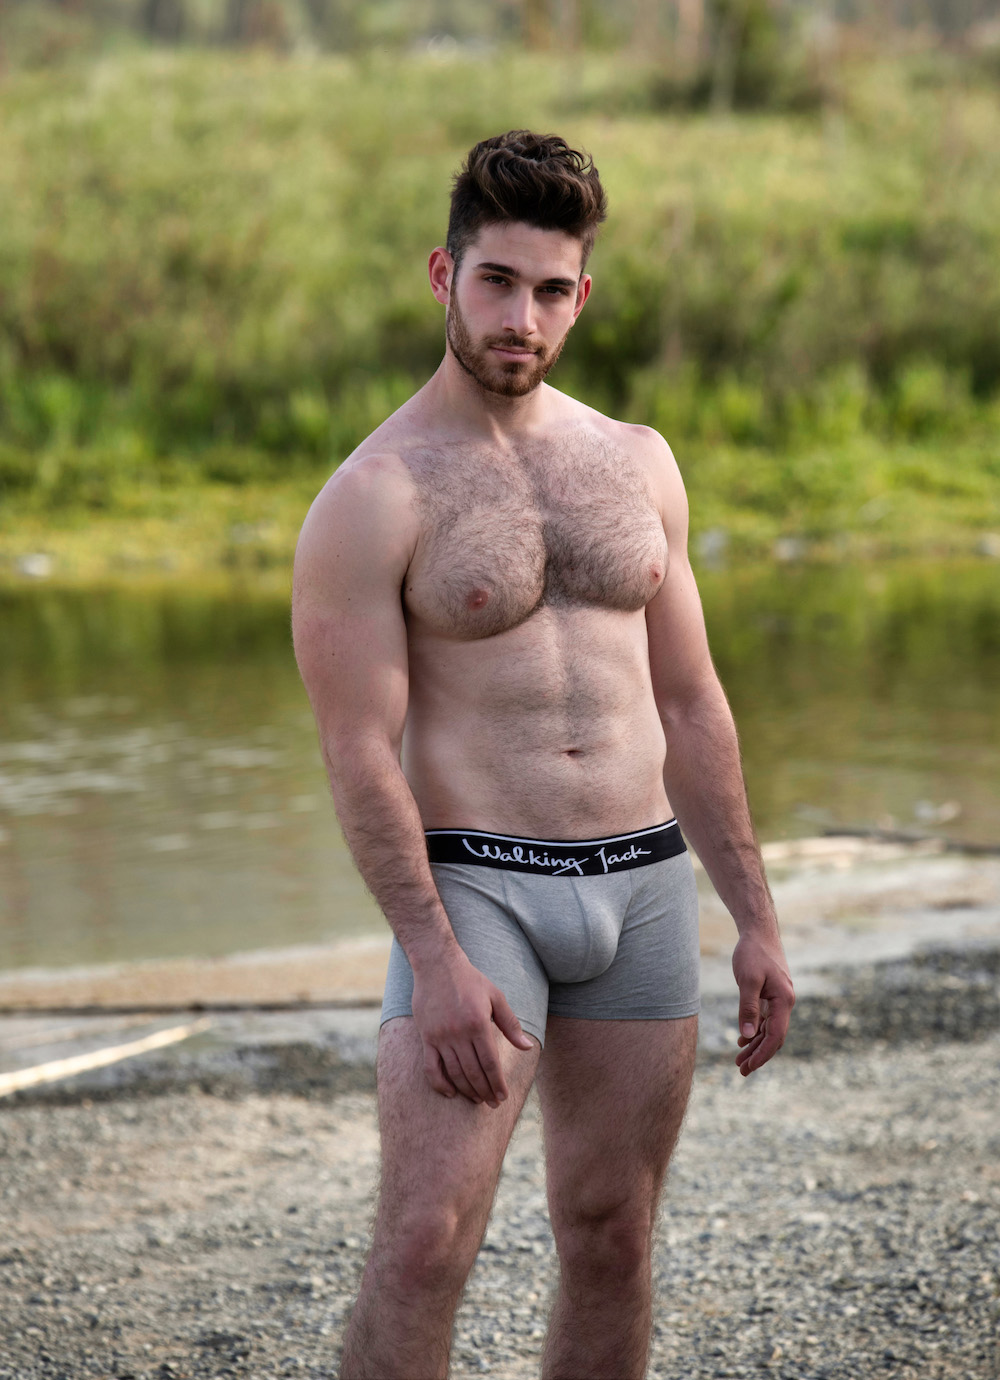 Roger by Louis C. Photography for WALKING JACK Underwear.